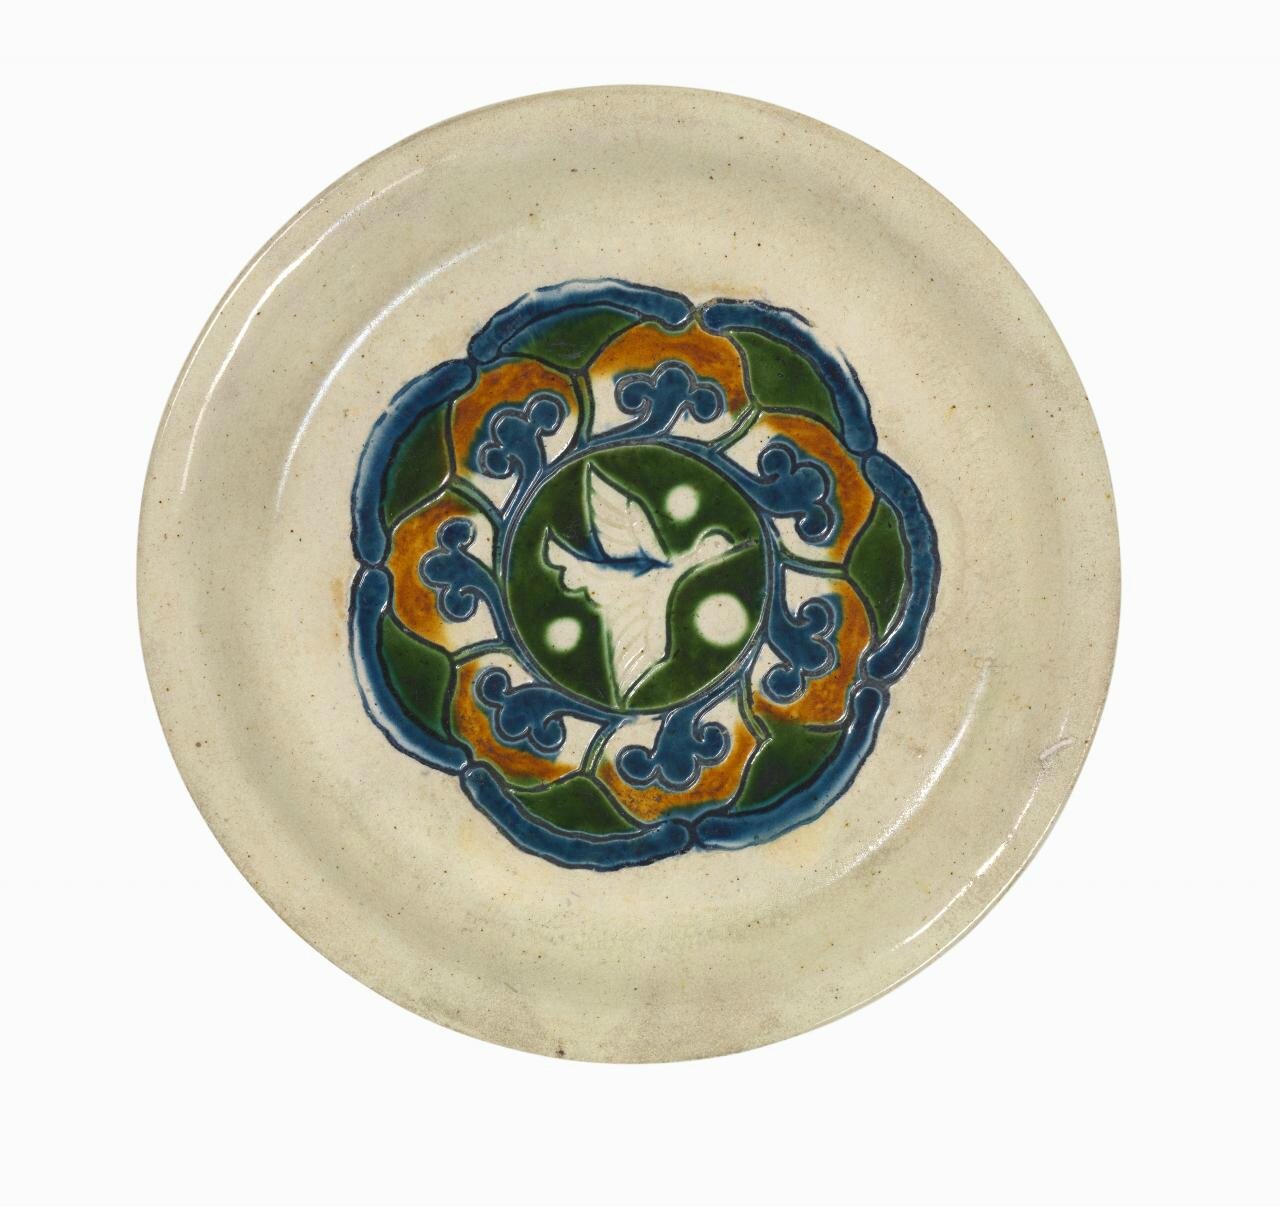 green ceramic plate whit persian writing for love